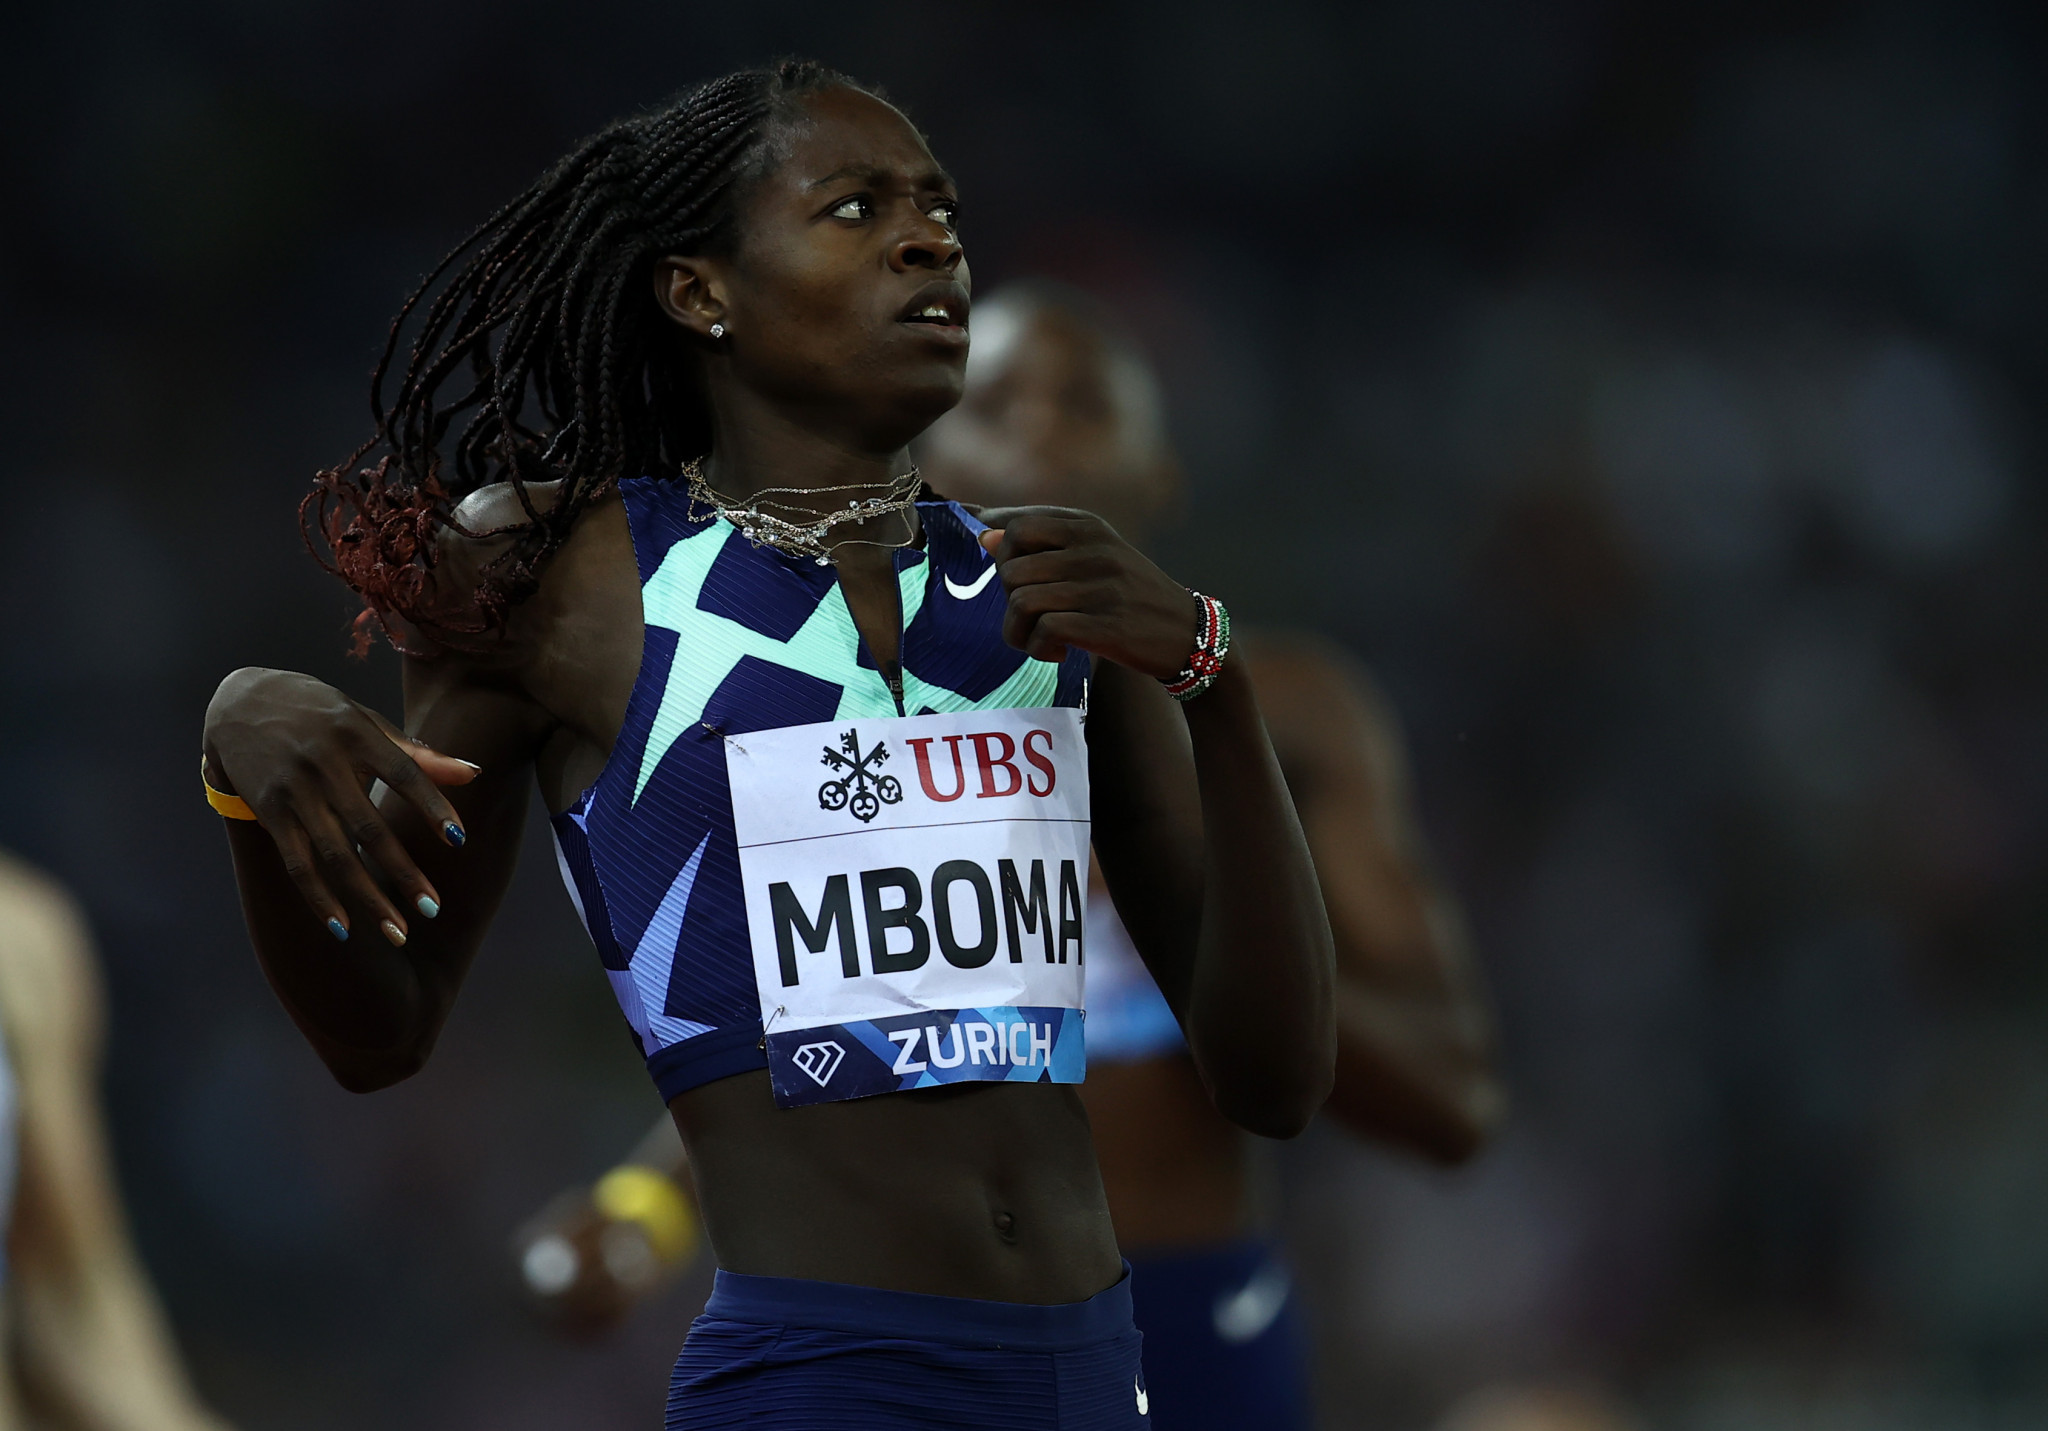 Christine Mboma won a historic Olympic silver medal for Namibia at Tokyo 2020 ©Getty Images